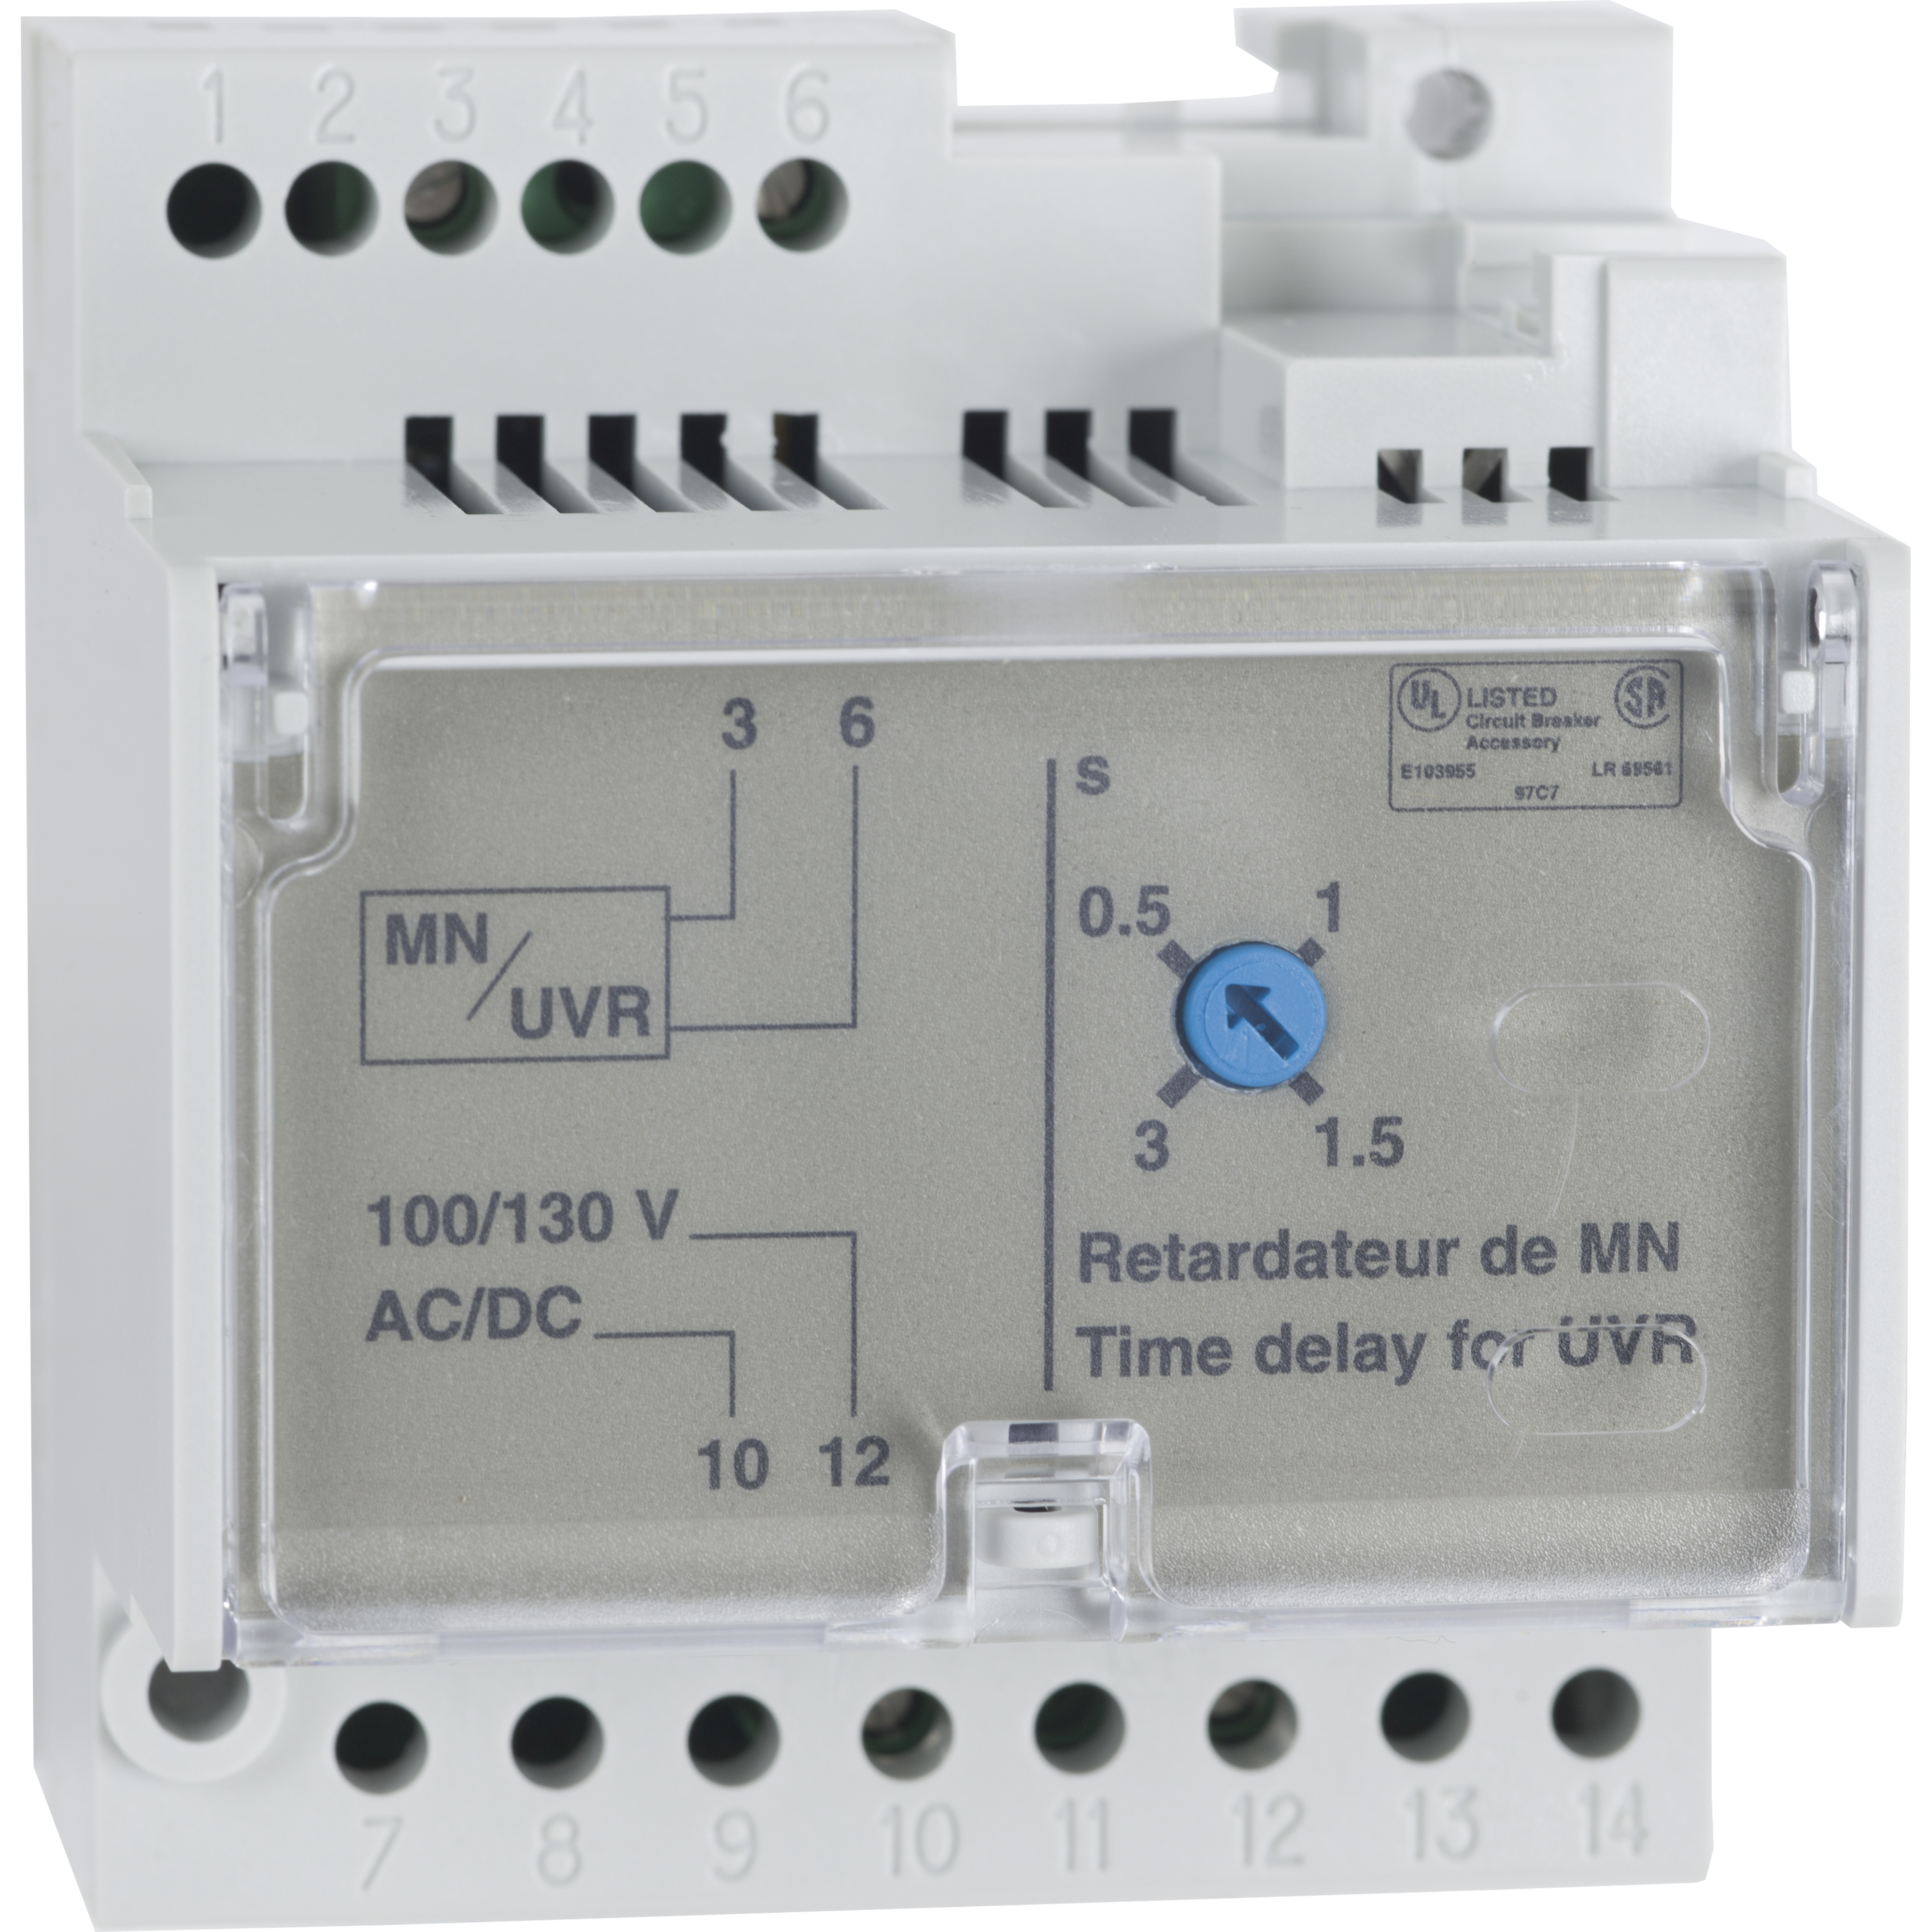 Circuit breaker accessory, PowerPacT M/P/R, MasterPacT NT, time delay module, 100V to 130V AC/DC, nonadjustable